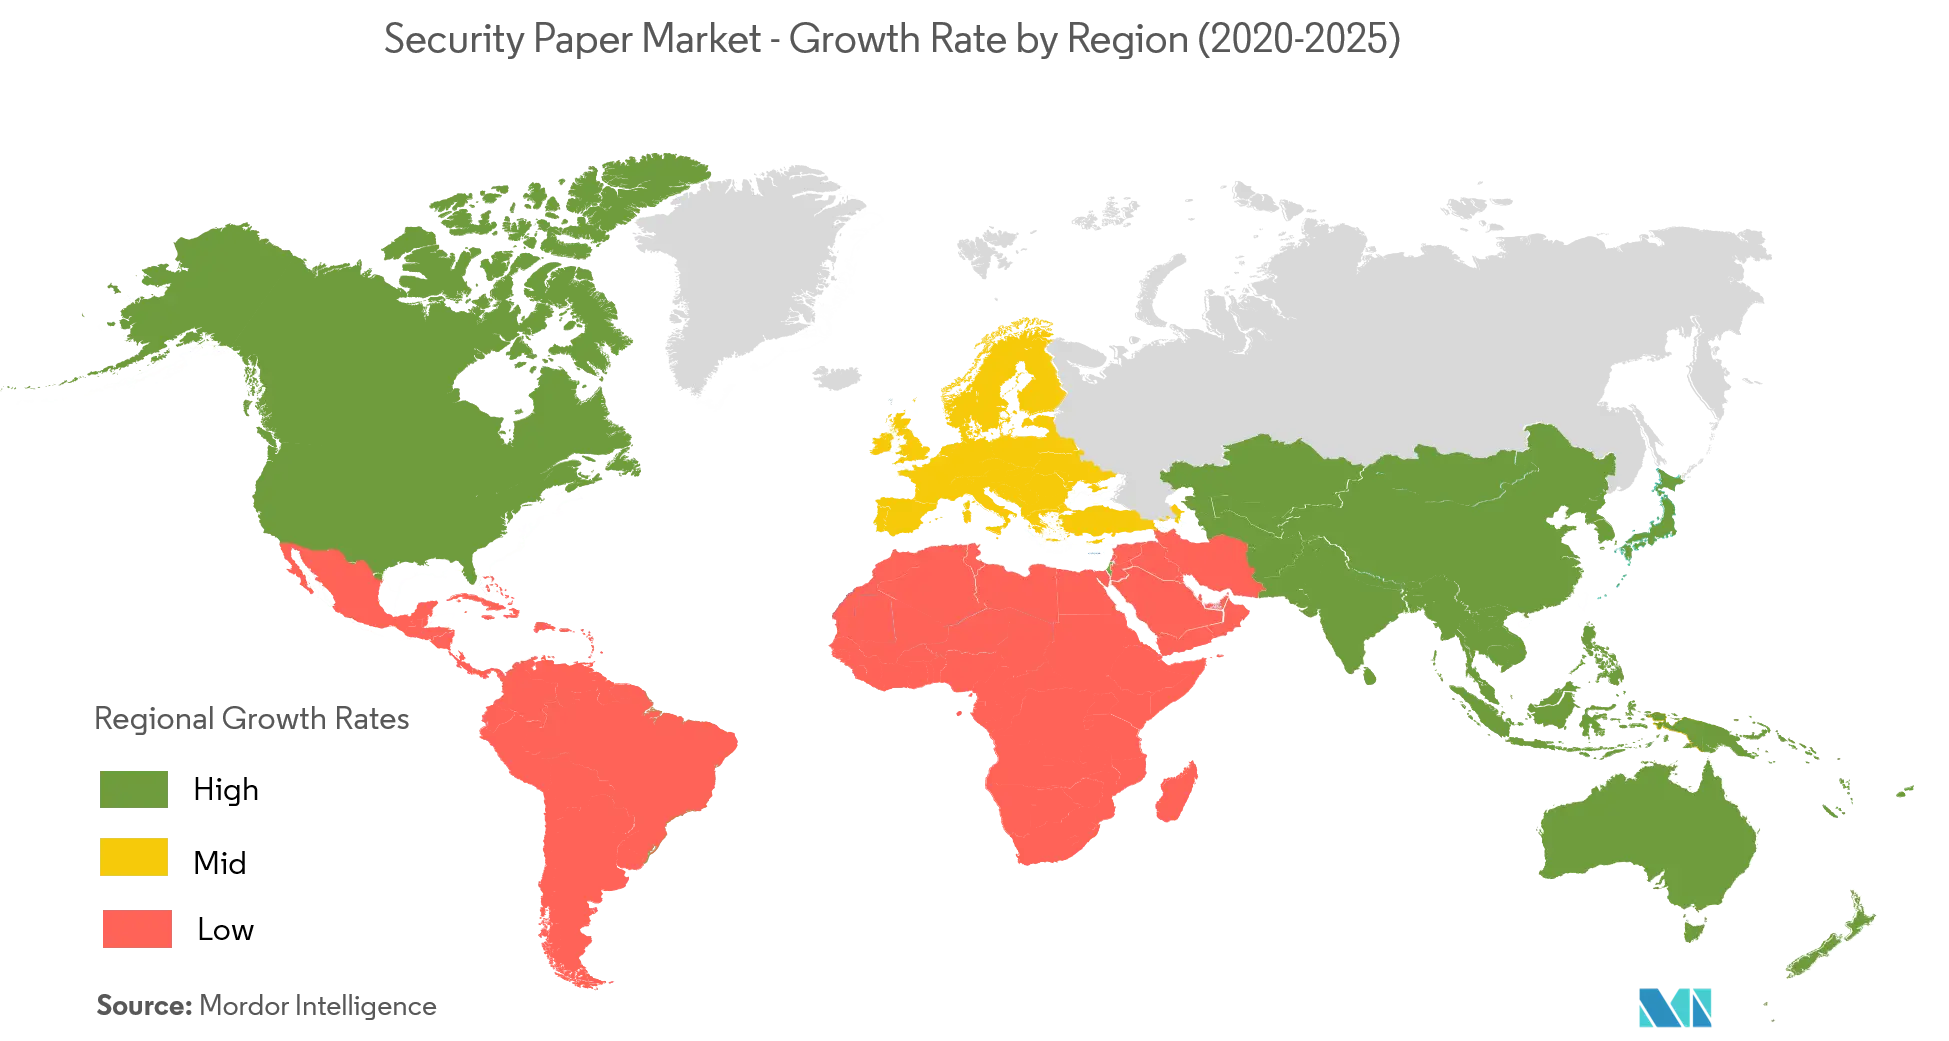 Security Paper Market - Growth Rate By Region (2020-2025)